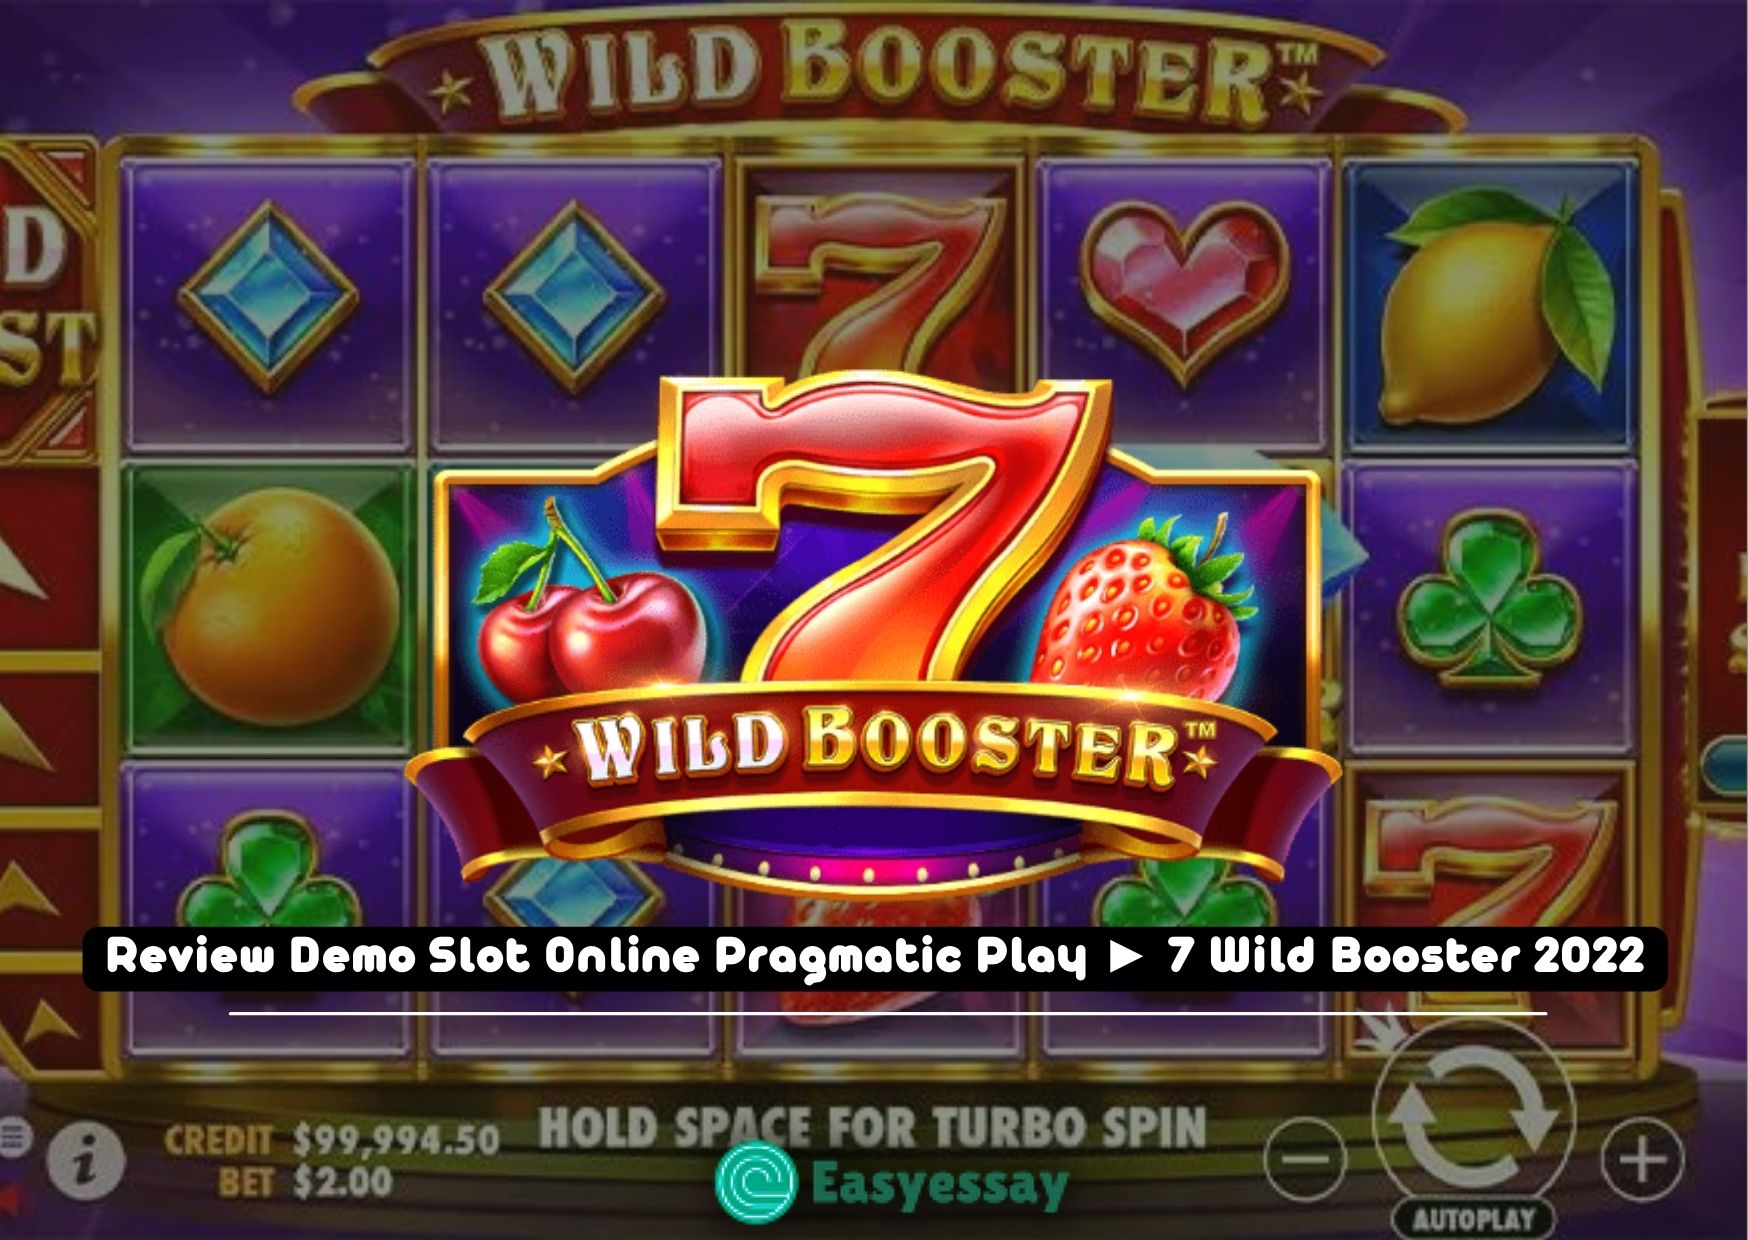 Review Demo Slot Online Pragmatic Play ► 7 Wild Booster 2022